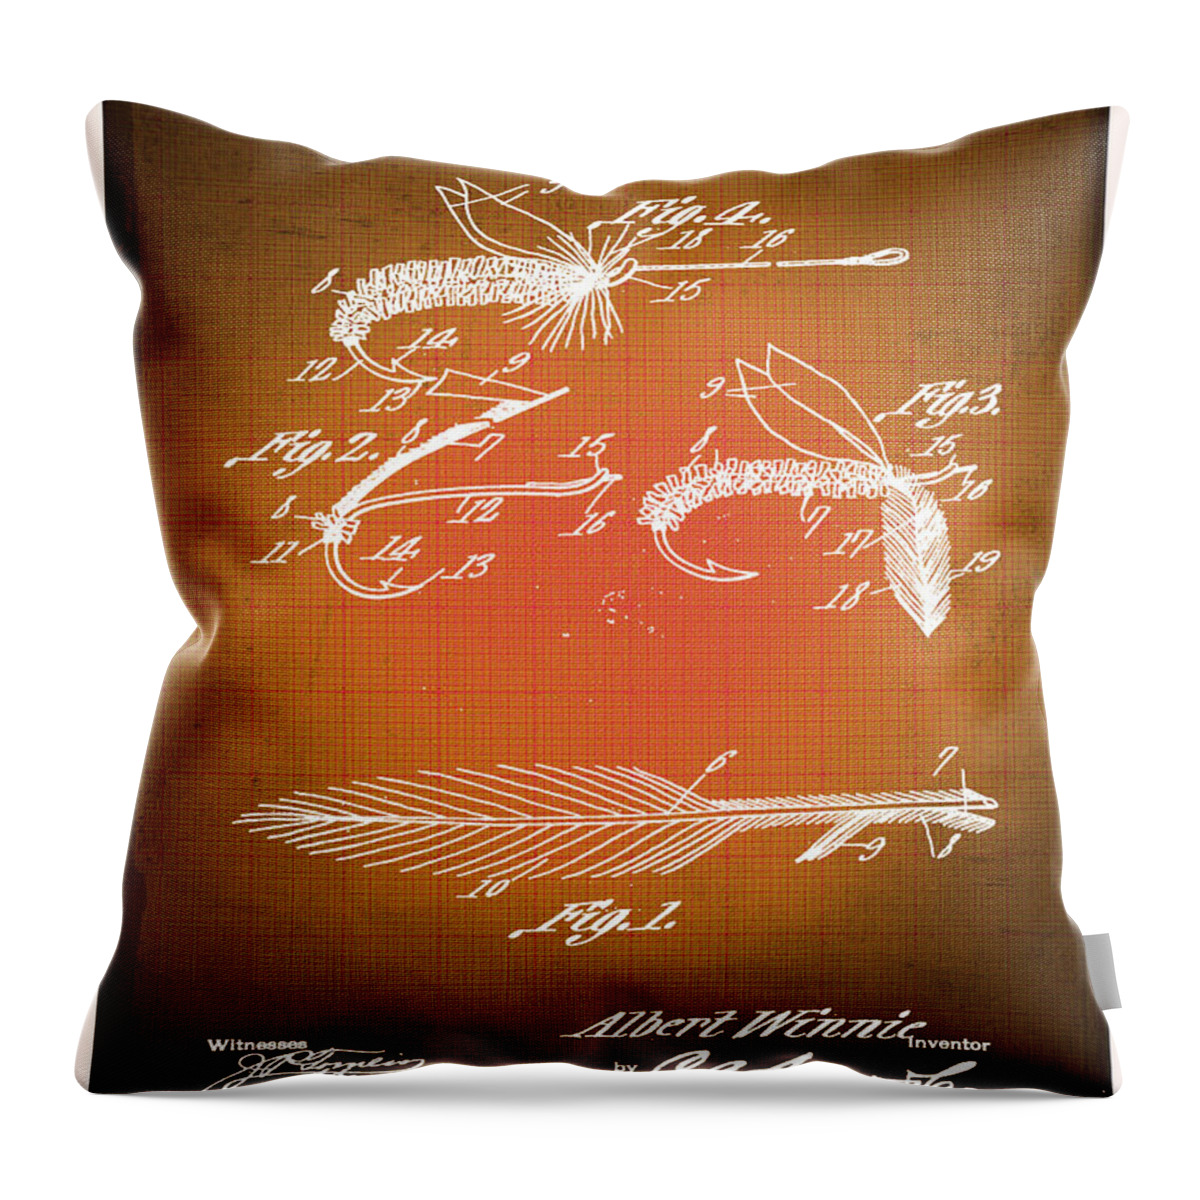 Artificial Fishing Bait Throw Pillow featuring the mixed media Fly Fishing Bait Patent Blueprint Drawing Sepia by Tony Rubino